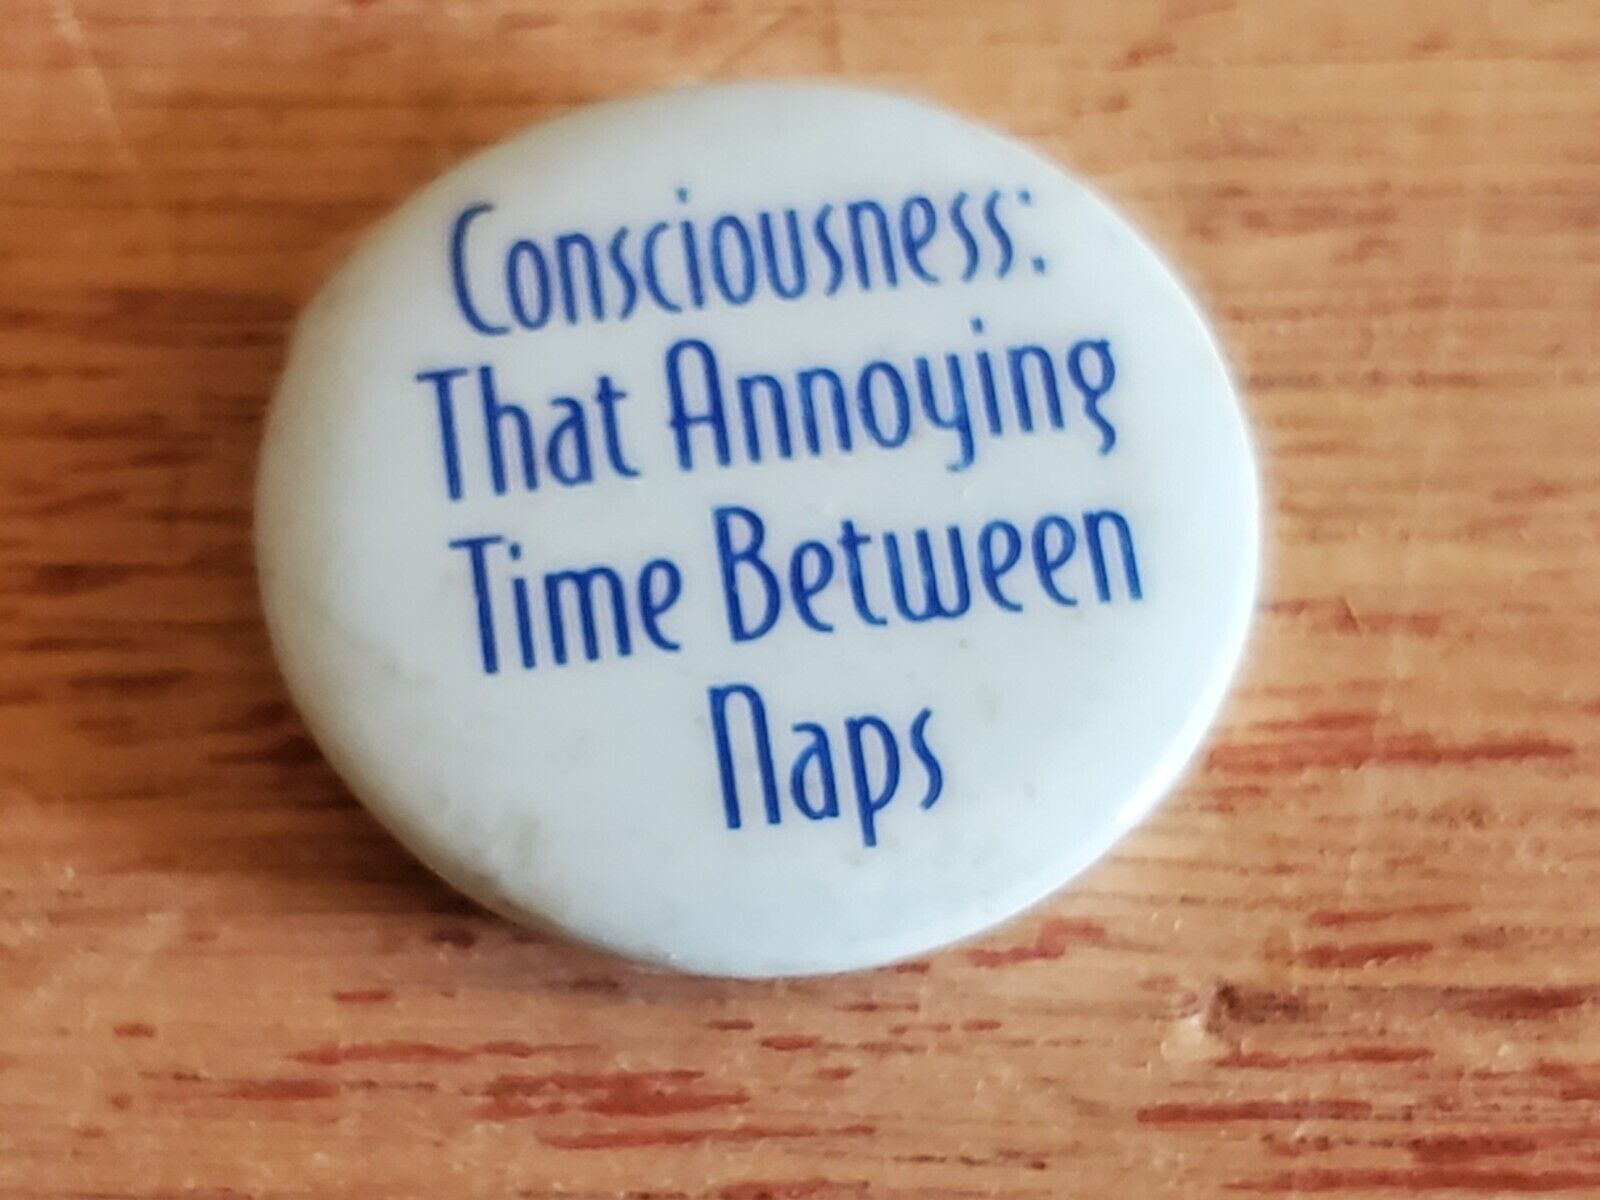 CONSCIOUSNESS Annoying Time Between Naps Badge Button PIn Pinback Vintage AS IS